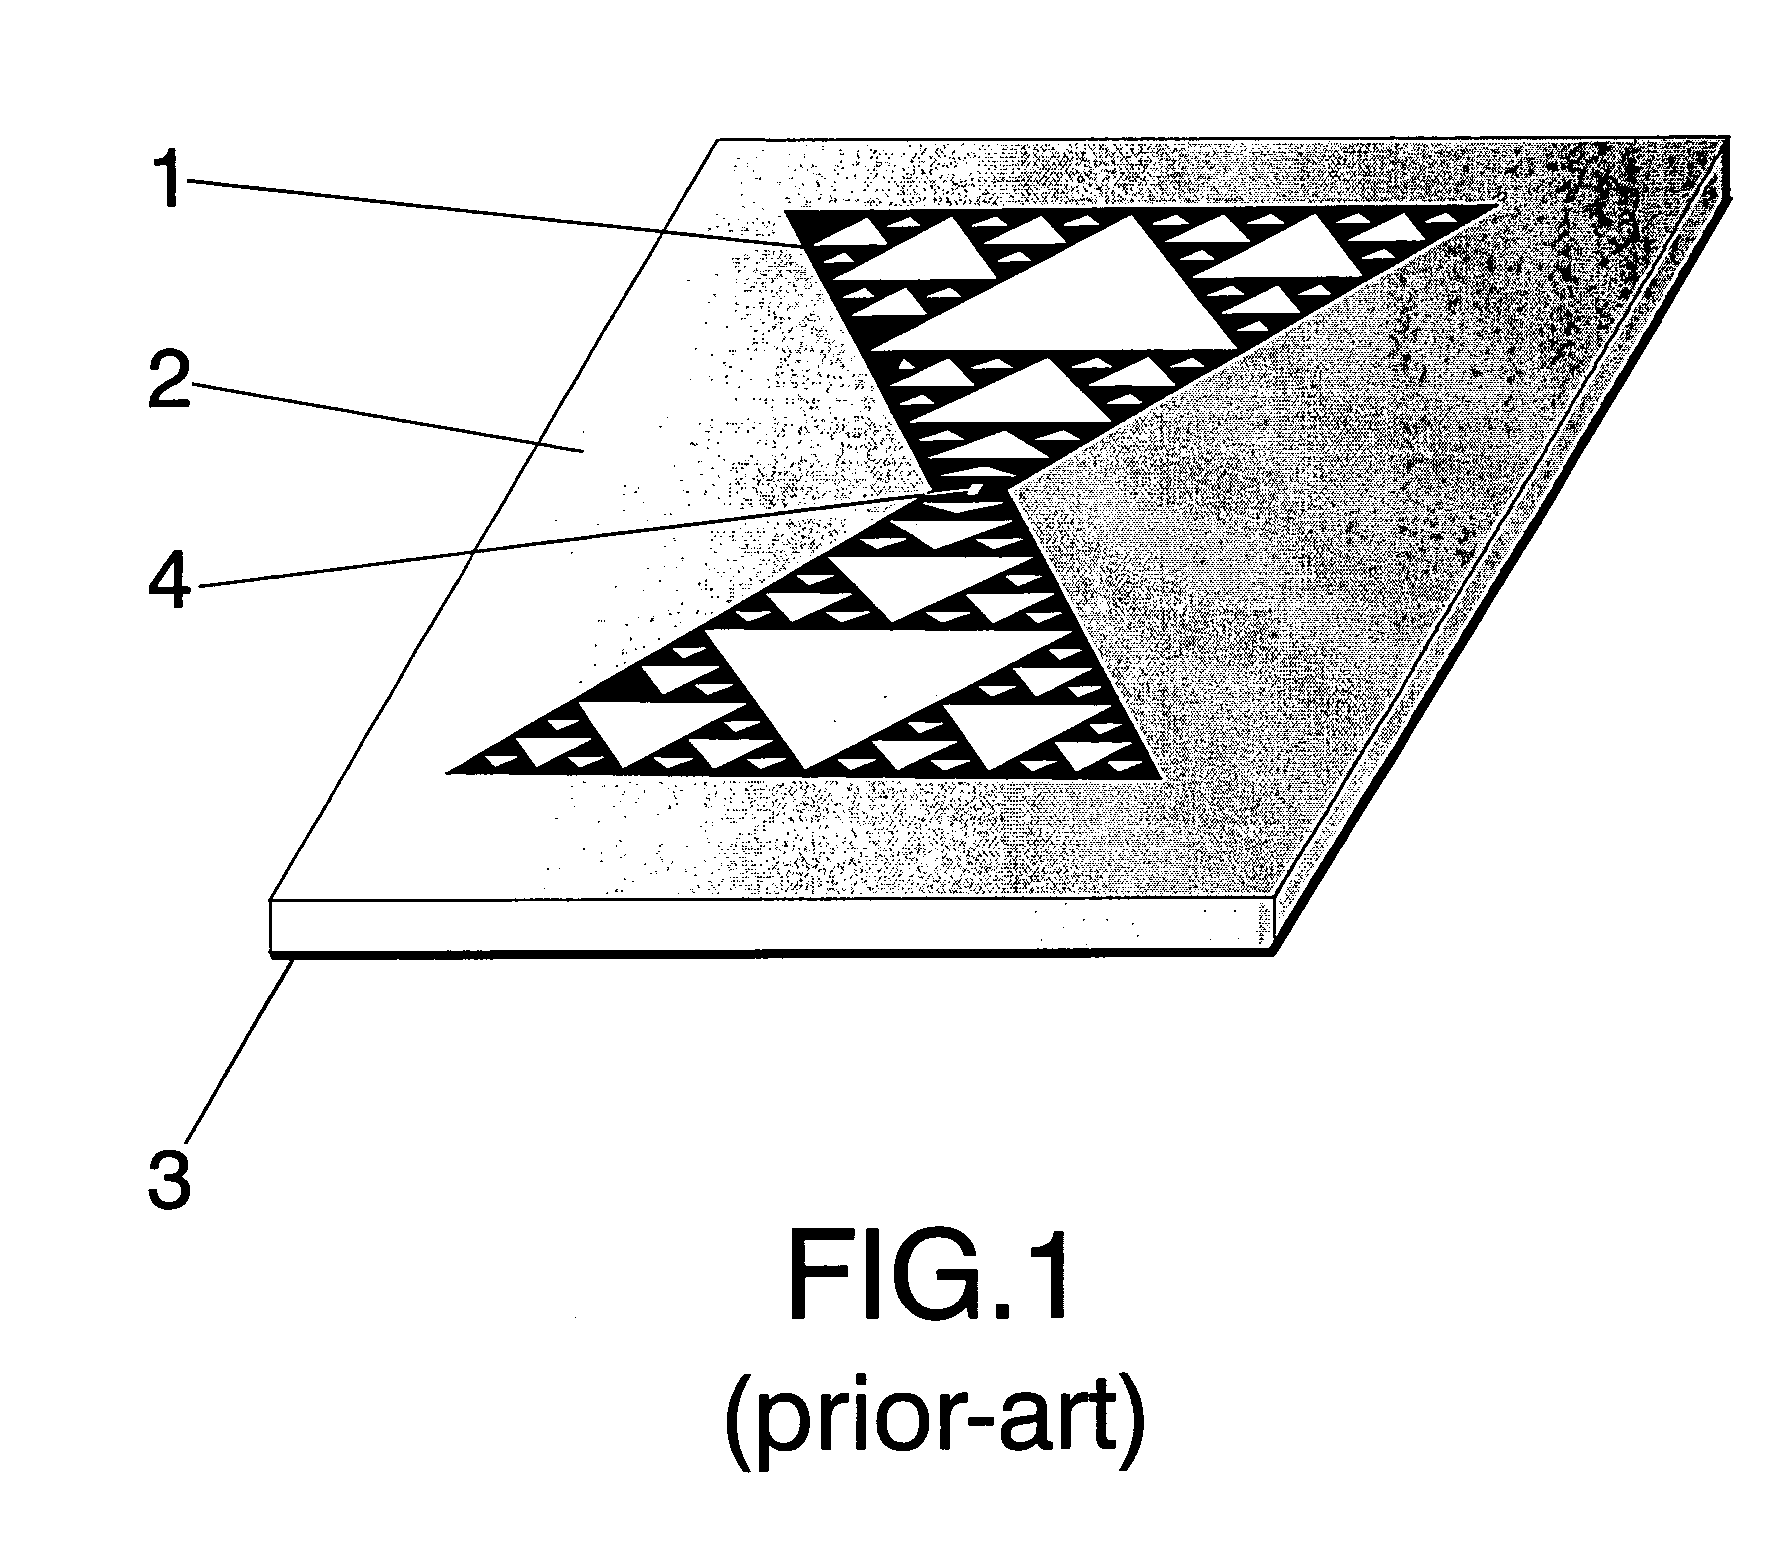 Undersampled microstrip array using multilevel and space-filling shaped elements